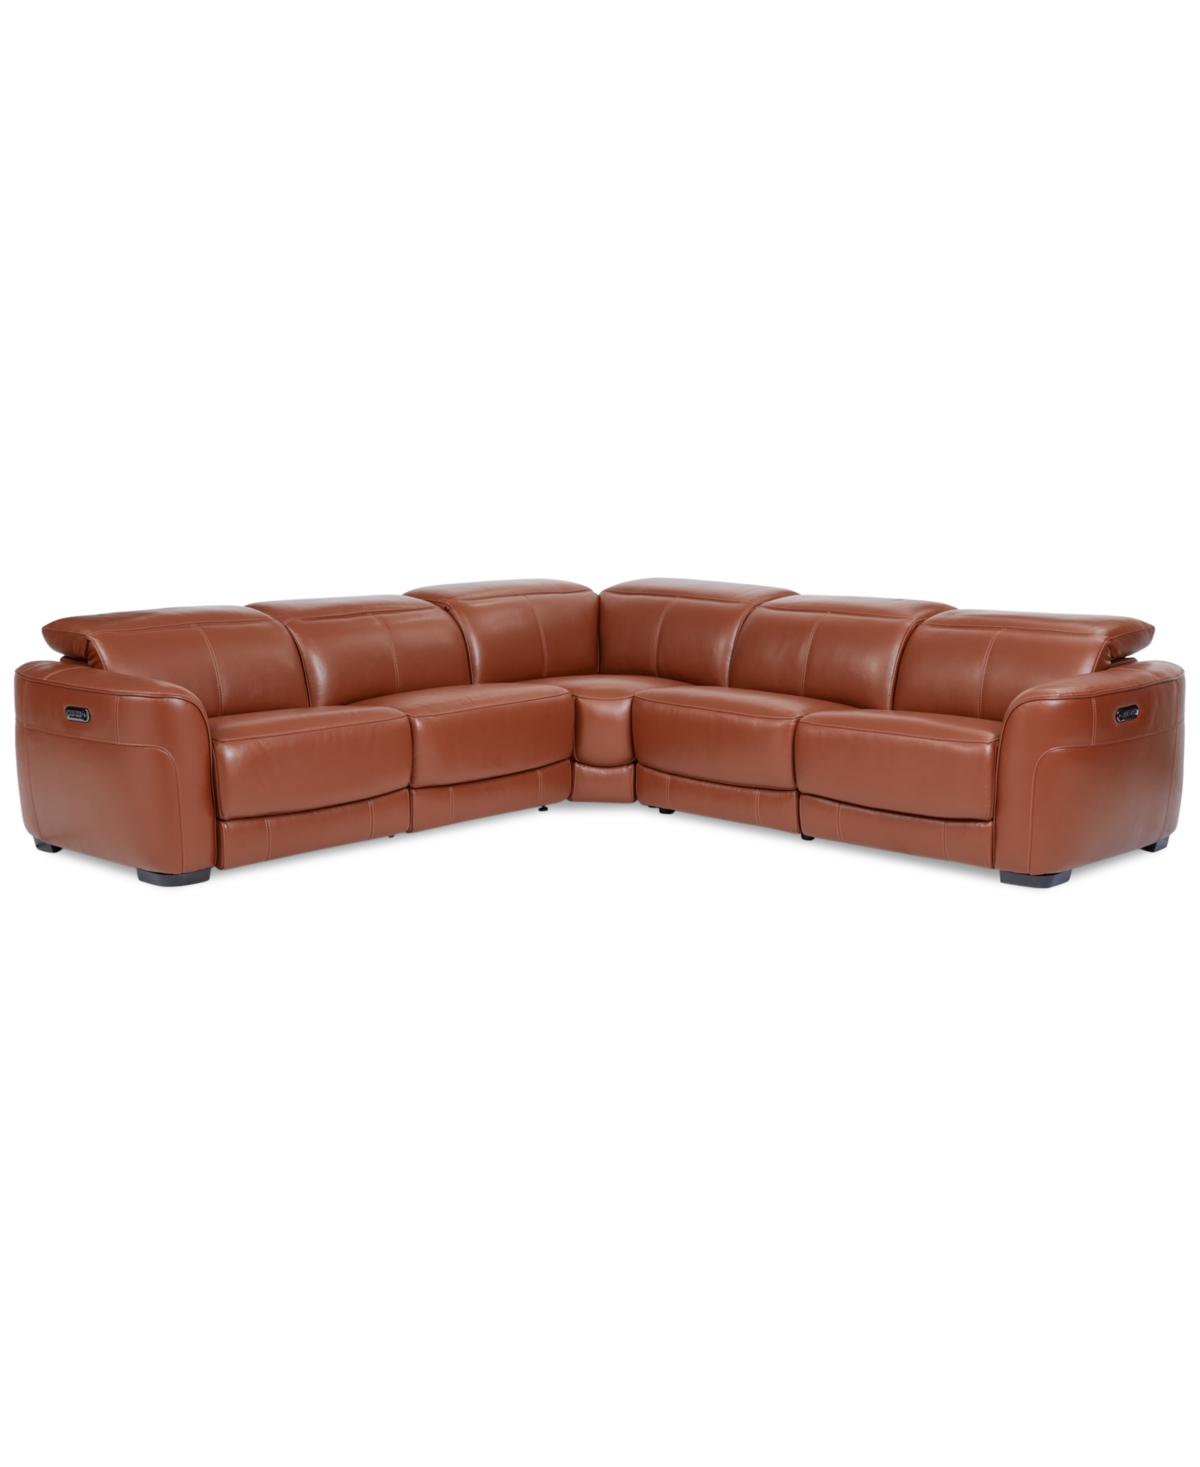 Lexanna 5-Pc. Leather Sectional with 2 Power Motion Recliners, Created for Macys